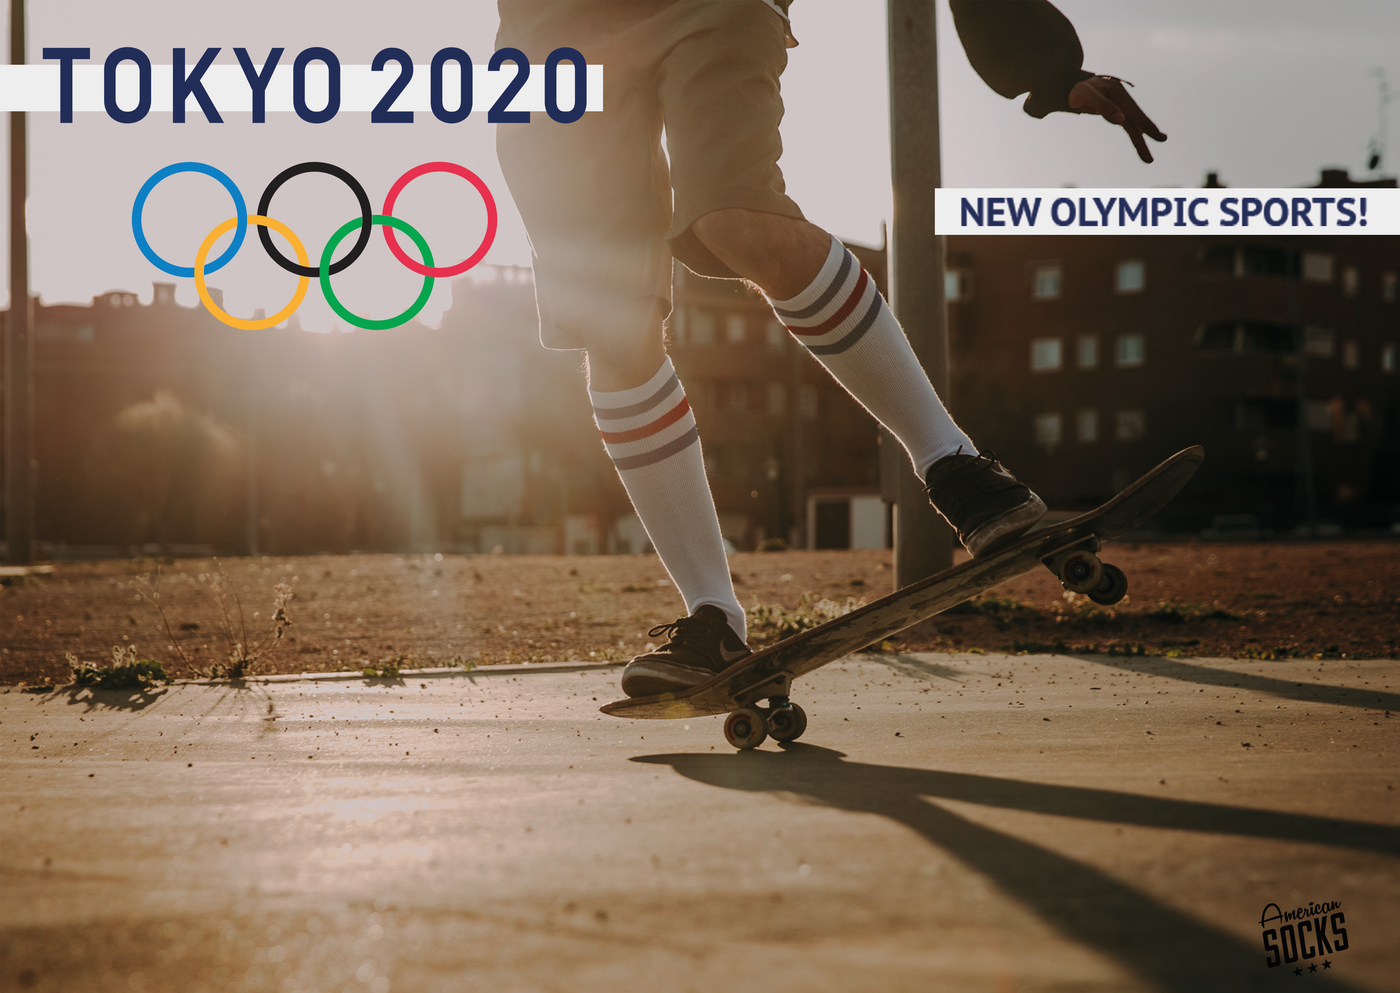 SKATE AND BMX IN THE TOKYO 2020 OLYMPICS!🏅